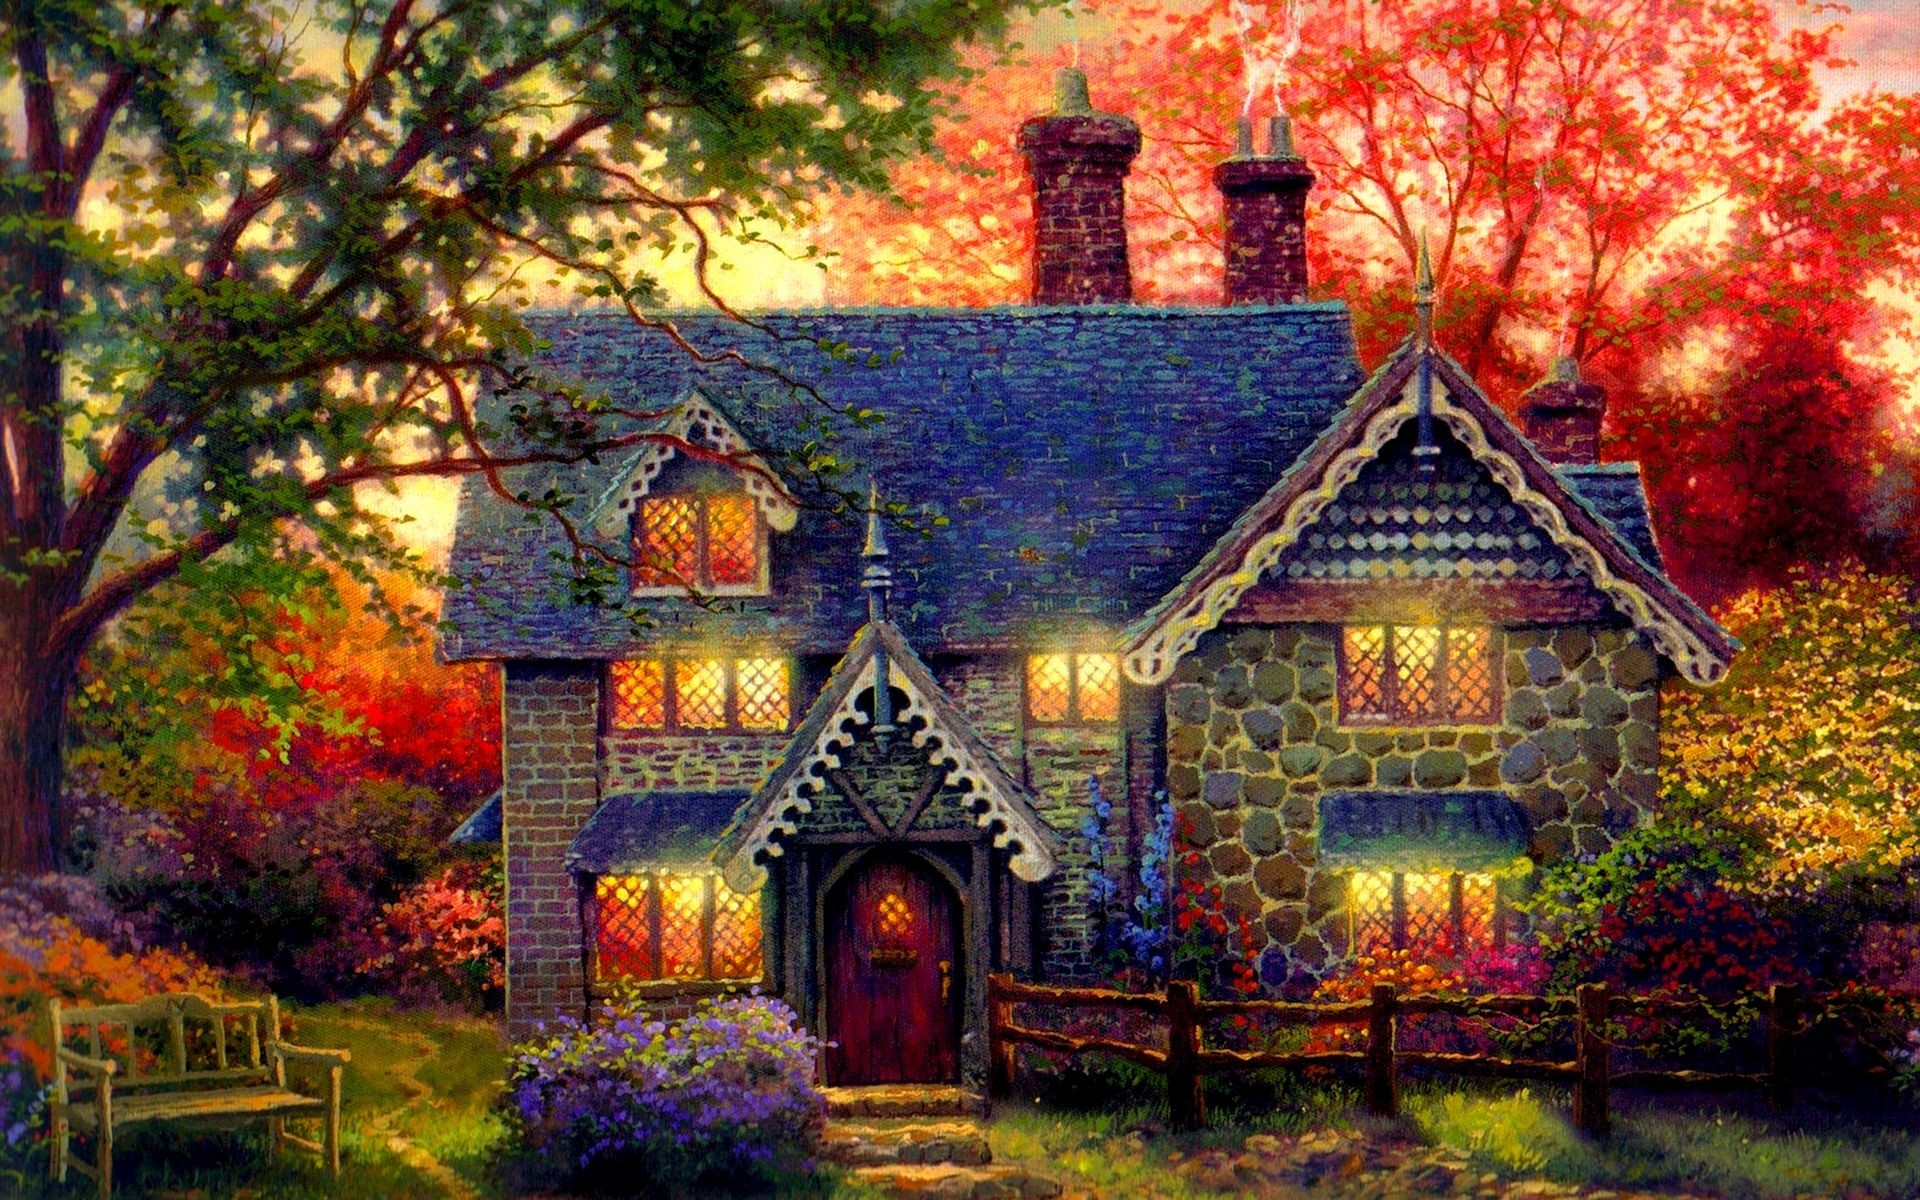 1920x1200 Beautiful, Cottage, Widescreen, High, Definition, Wallpaper, Download,  Cottage, Image, Free, Hd Wallpapers, Amazing Photos, Download, 1920Ã1200 Wallpaper  HD